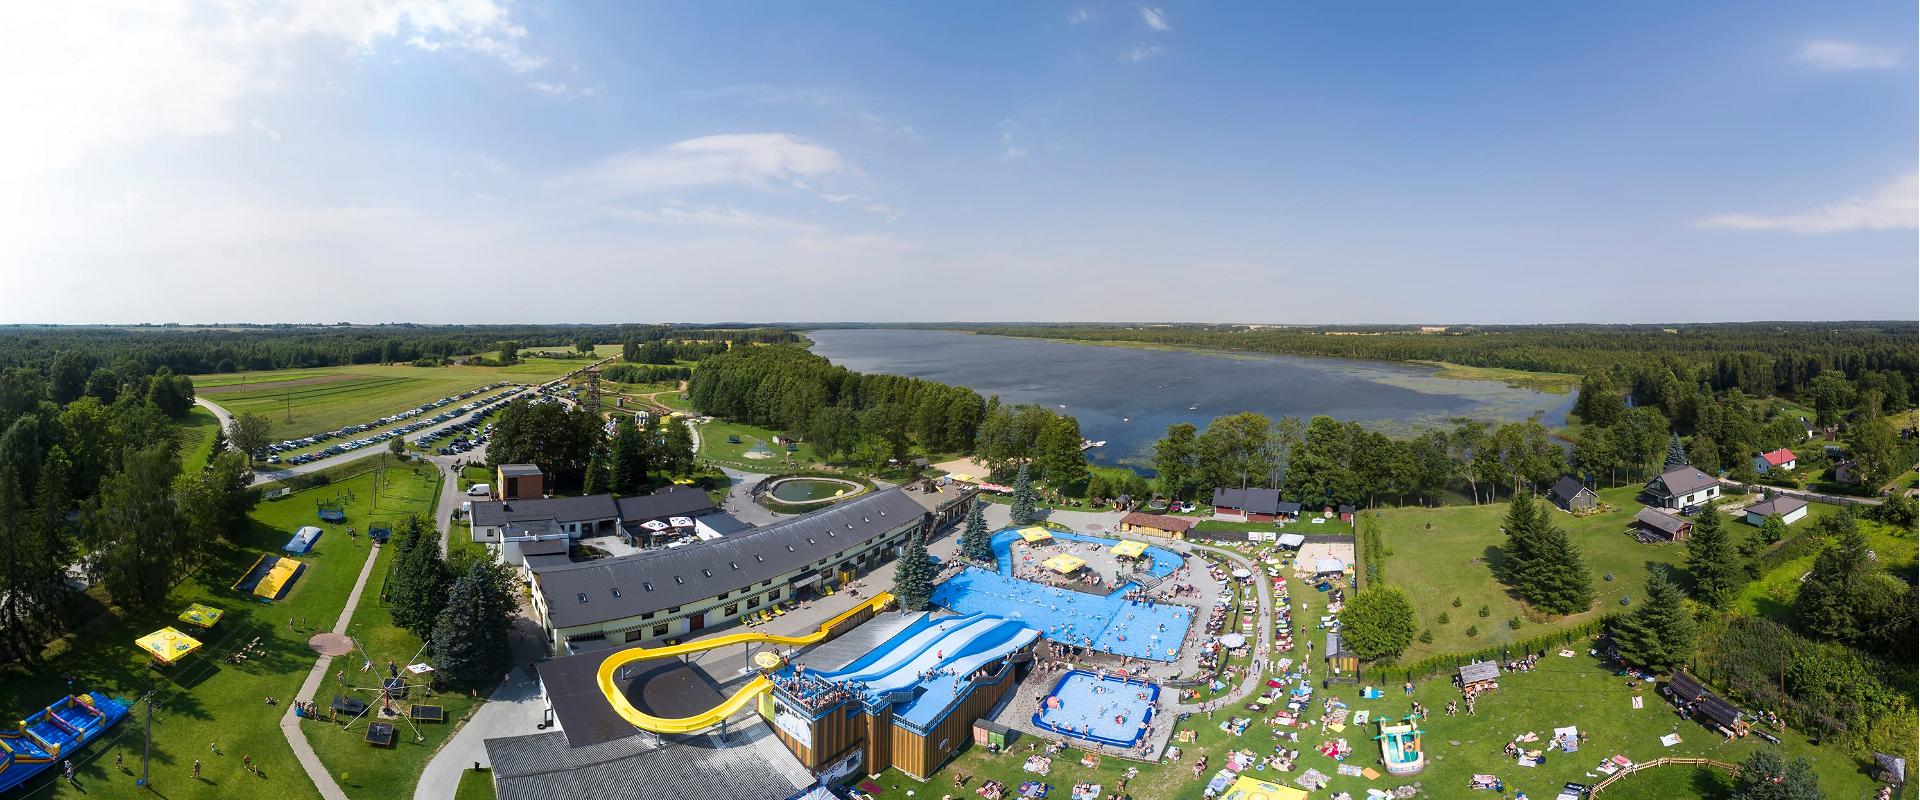 Vudila Playland has a large outdoor water park with a three-tier slide and a tube, saunas, swings, climbing attractions, trampolines, sky-jump, bumper